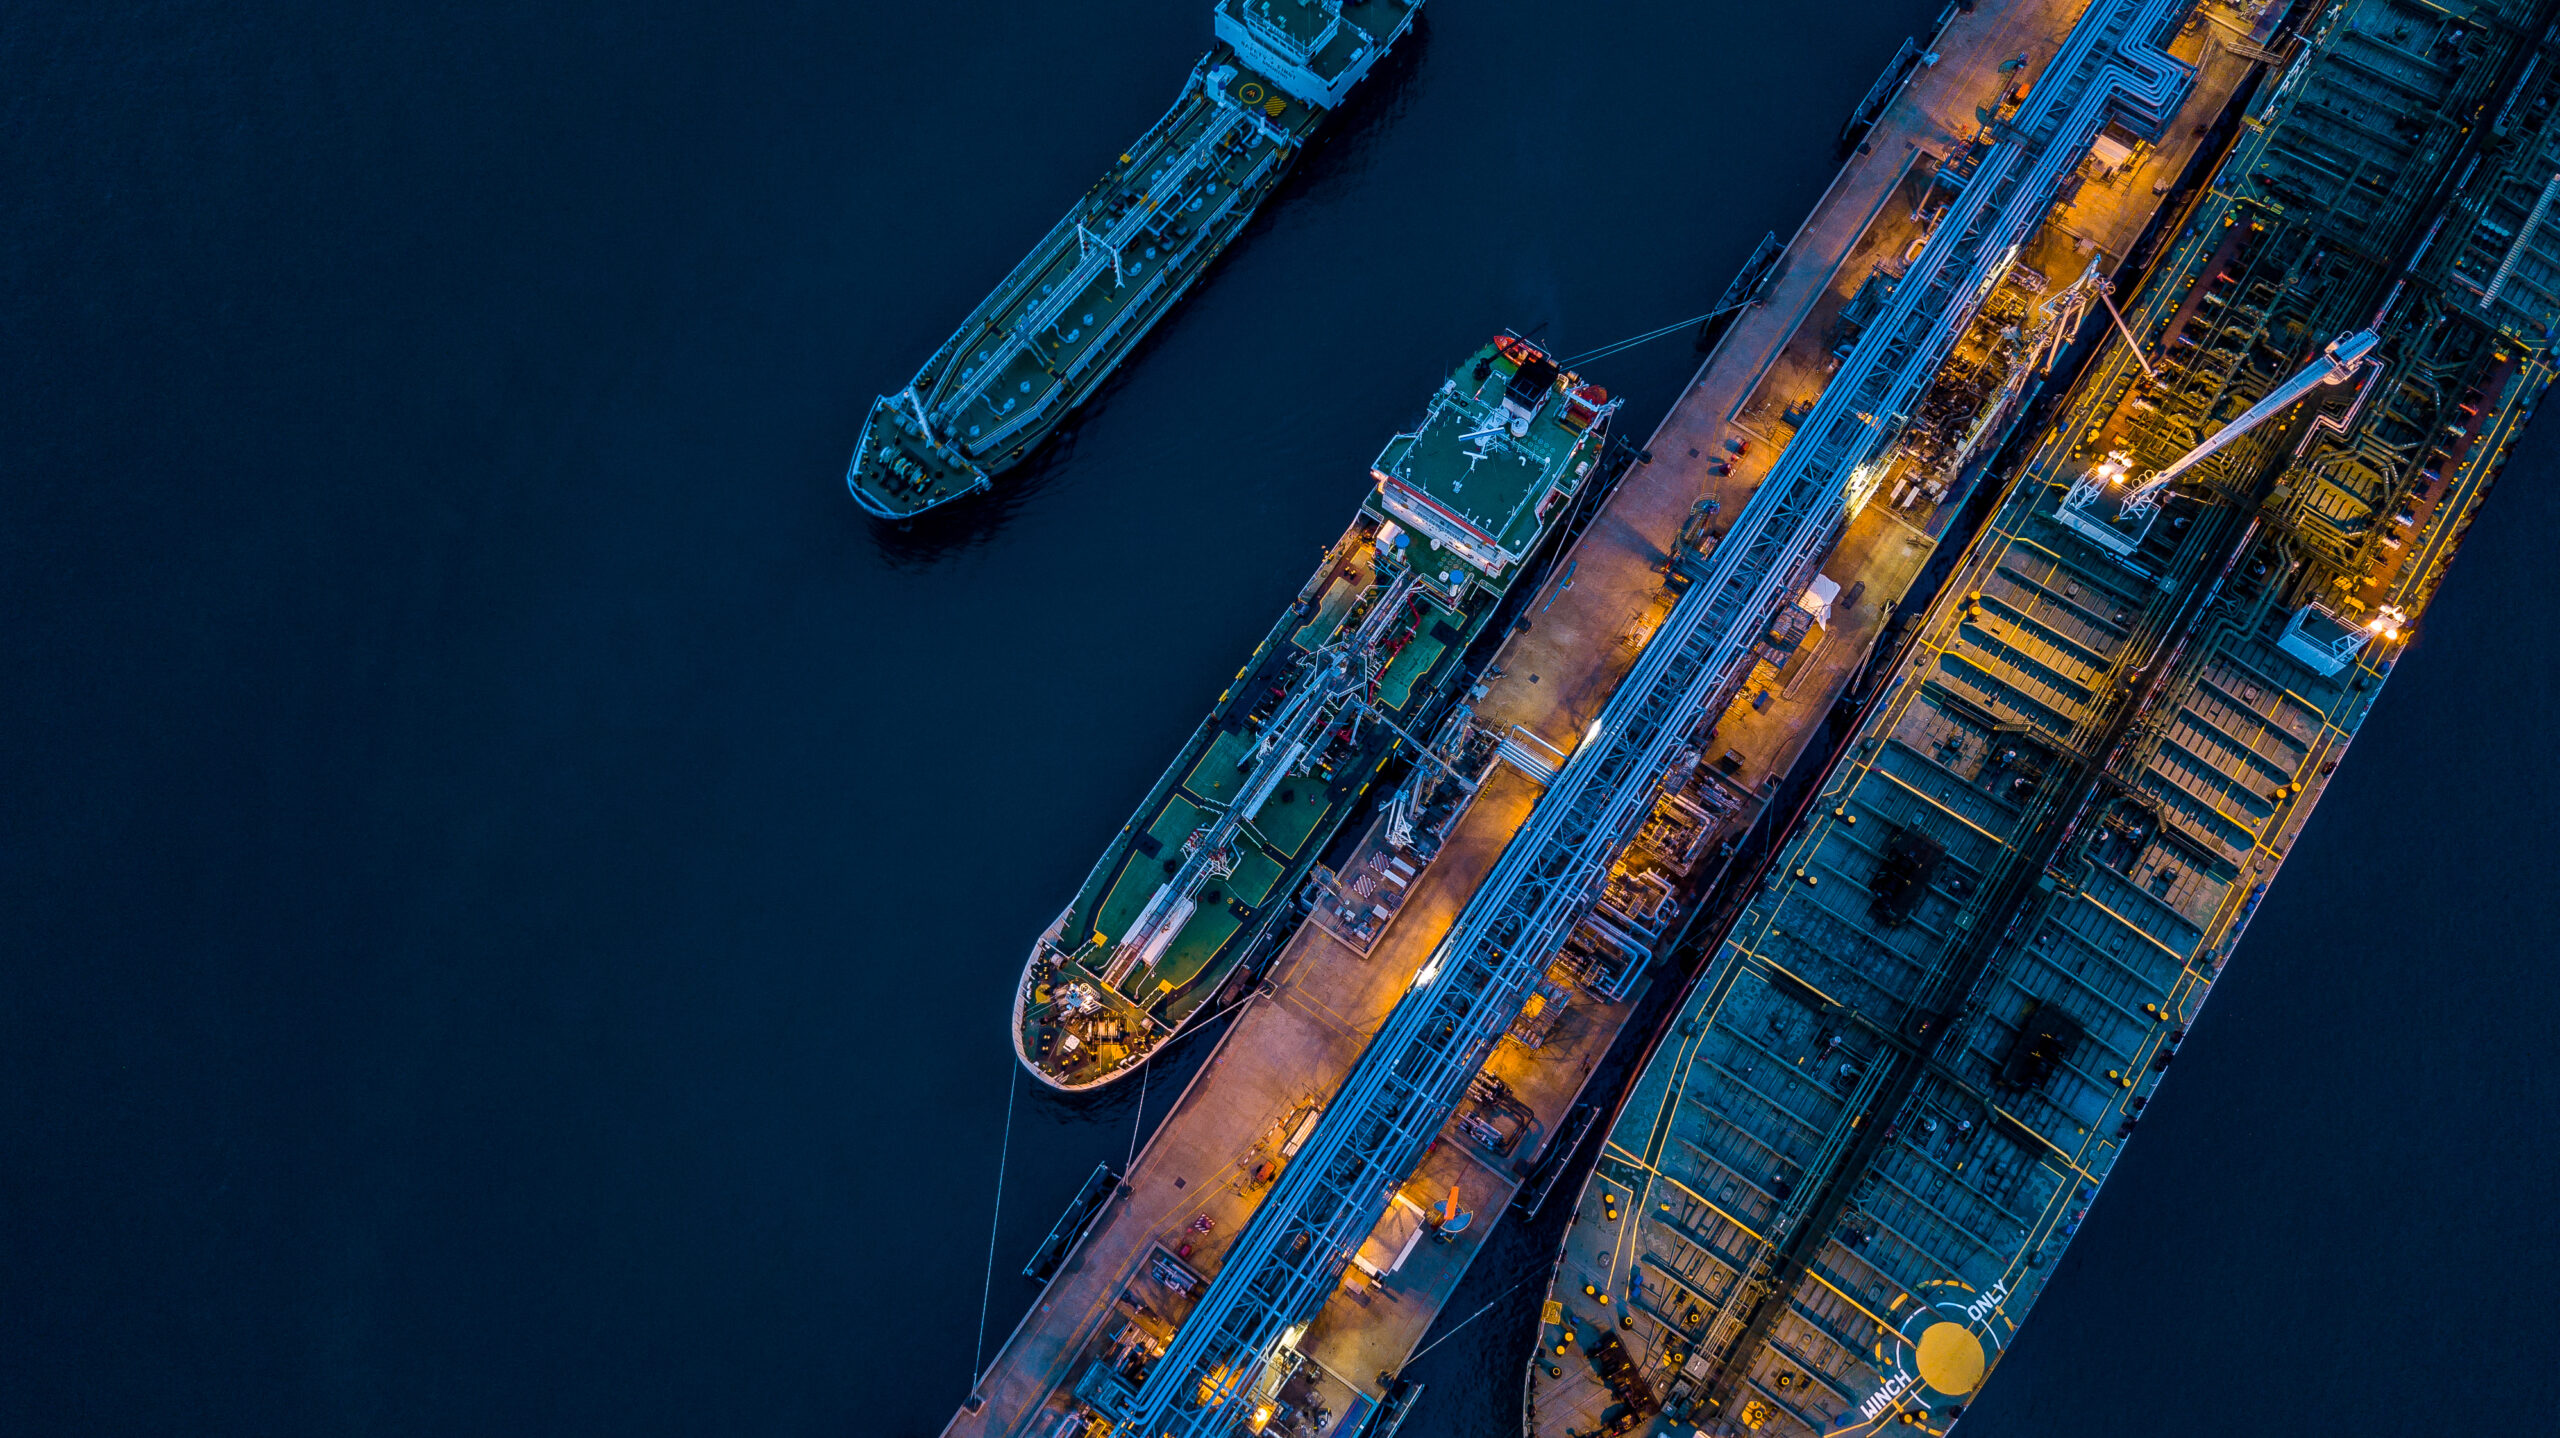 Aerial view of ships docked at a port